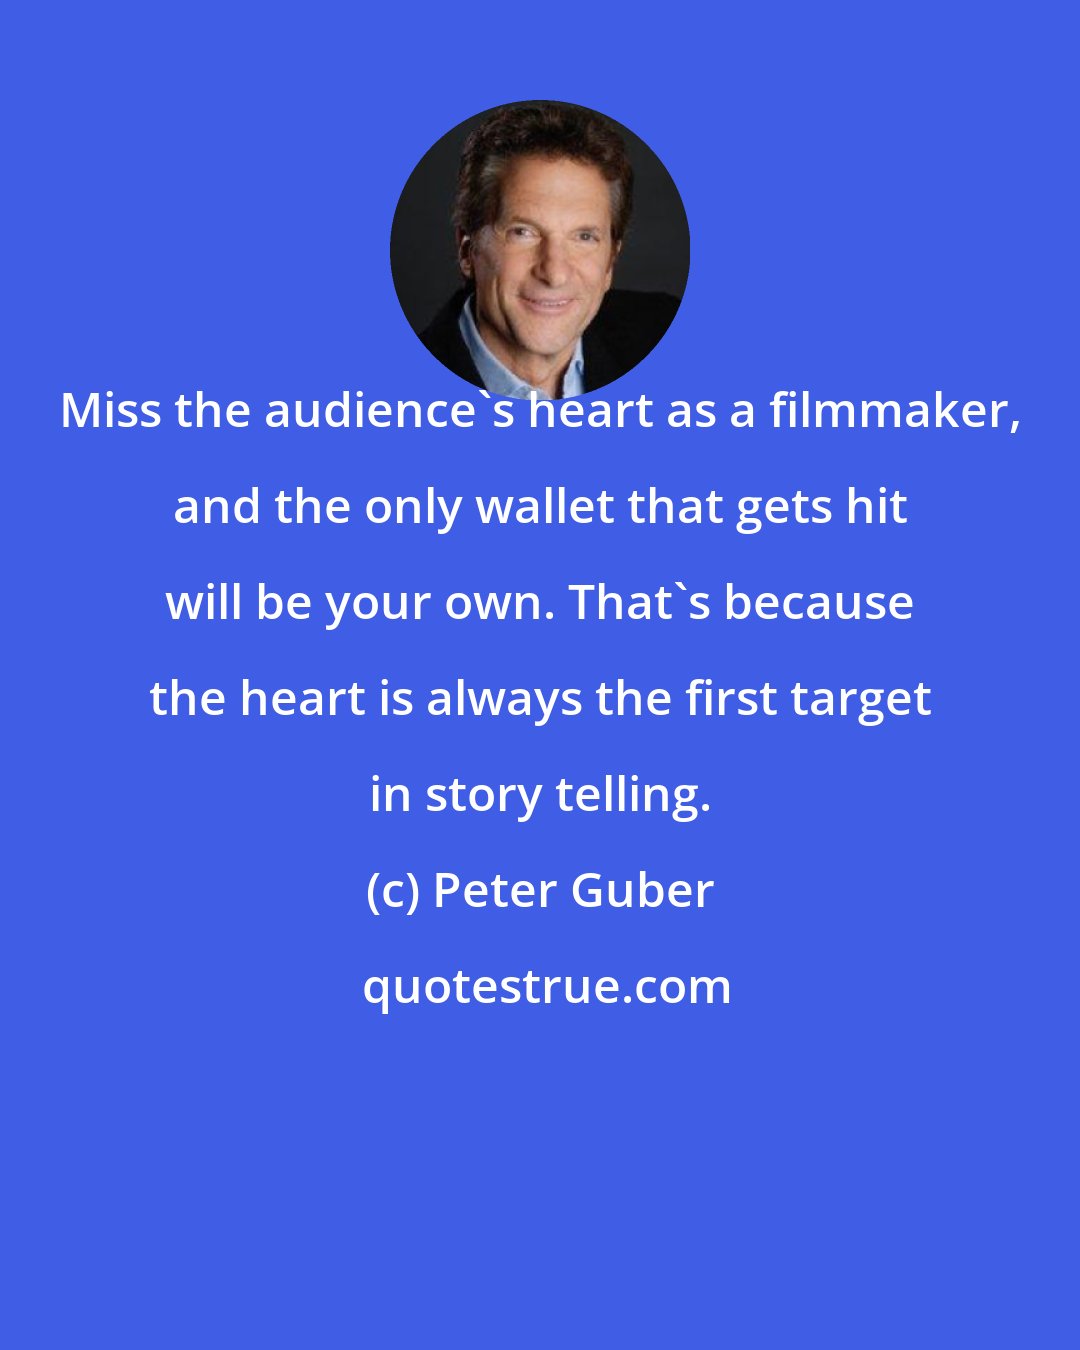 Peter Guber: Miss the audience's heart as a filmmaker, and the only wallet that gets hit will be your own. That's because the heart is always the first target in story telling.